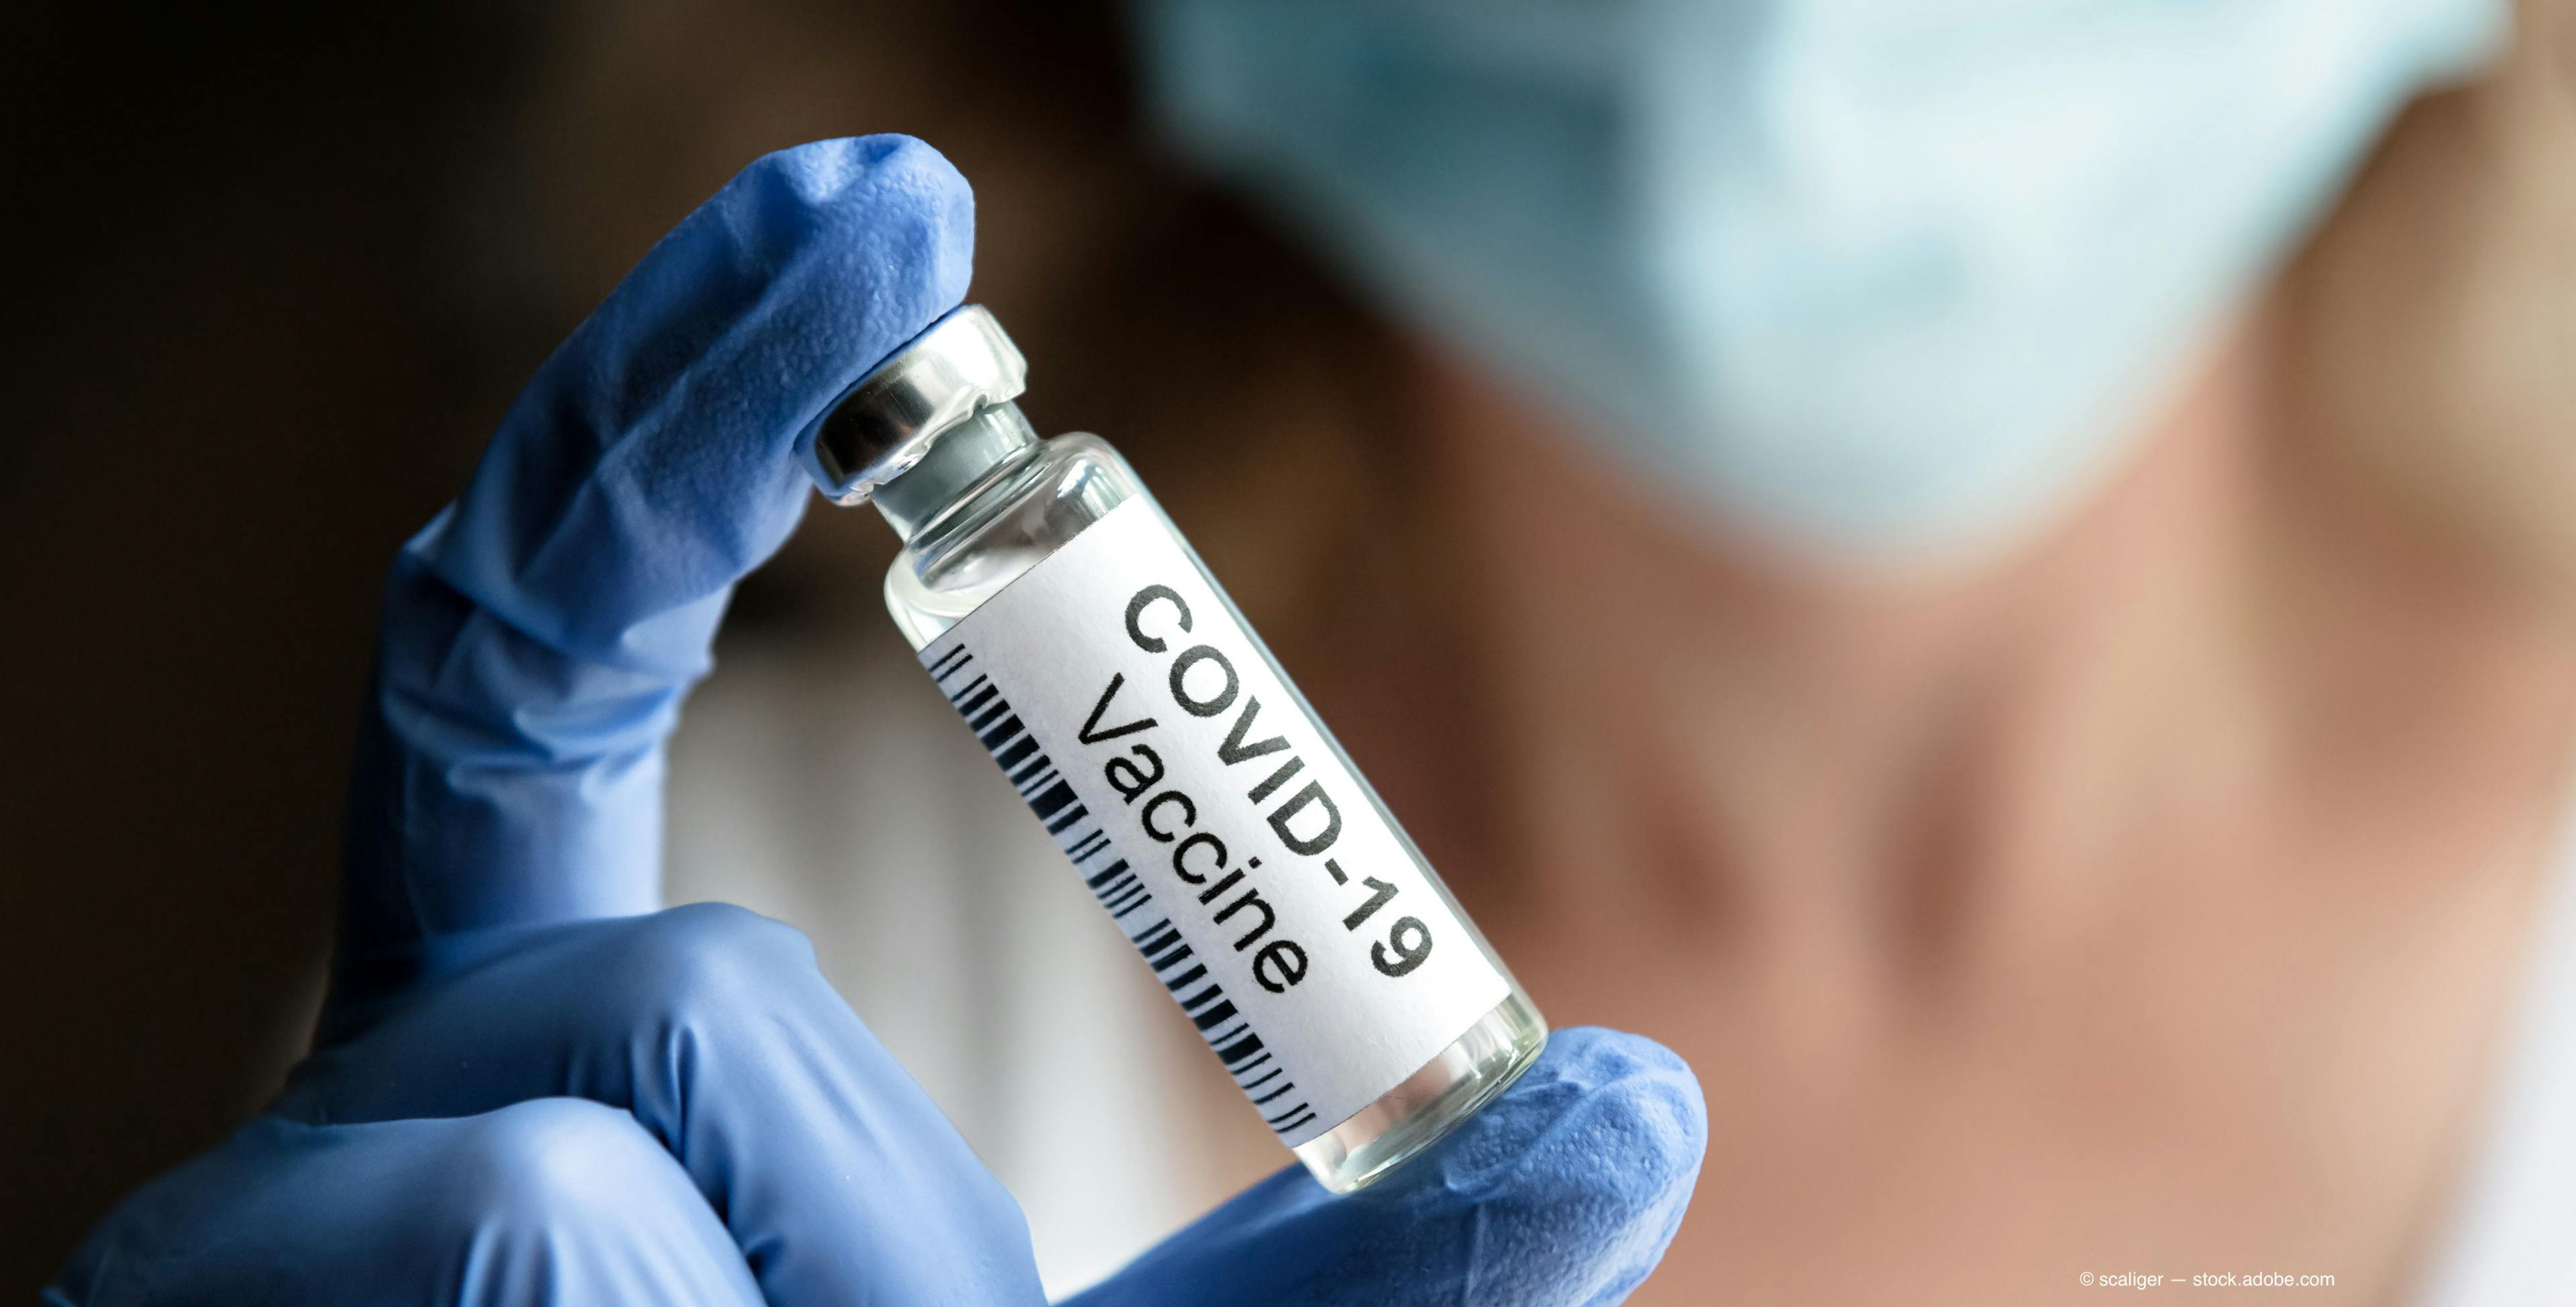 Poll: Will you take the COVID-19 vaccination?